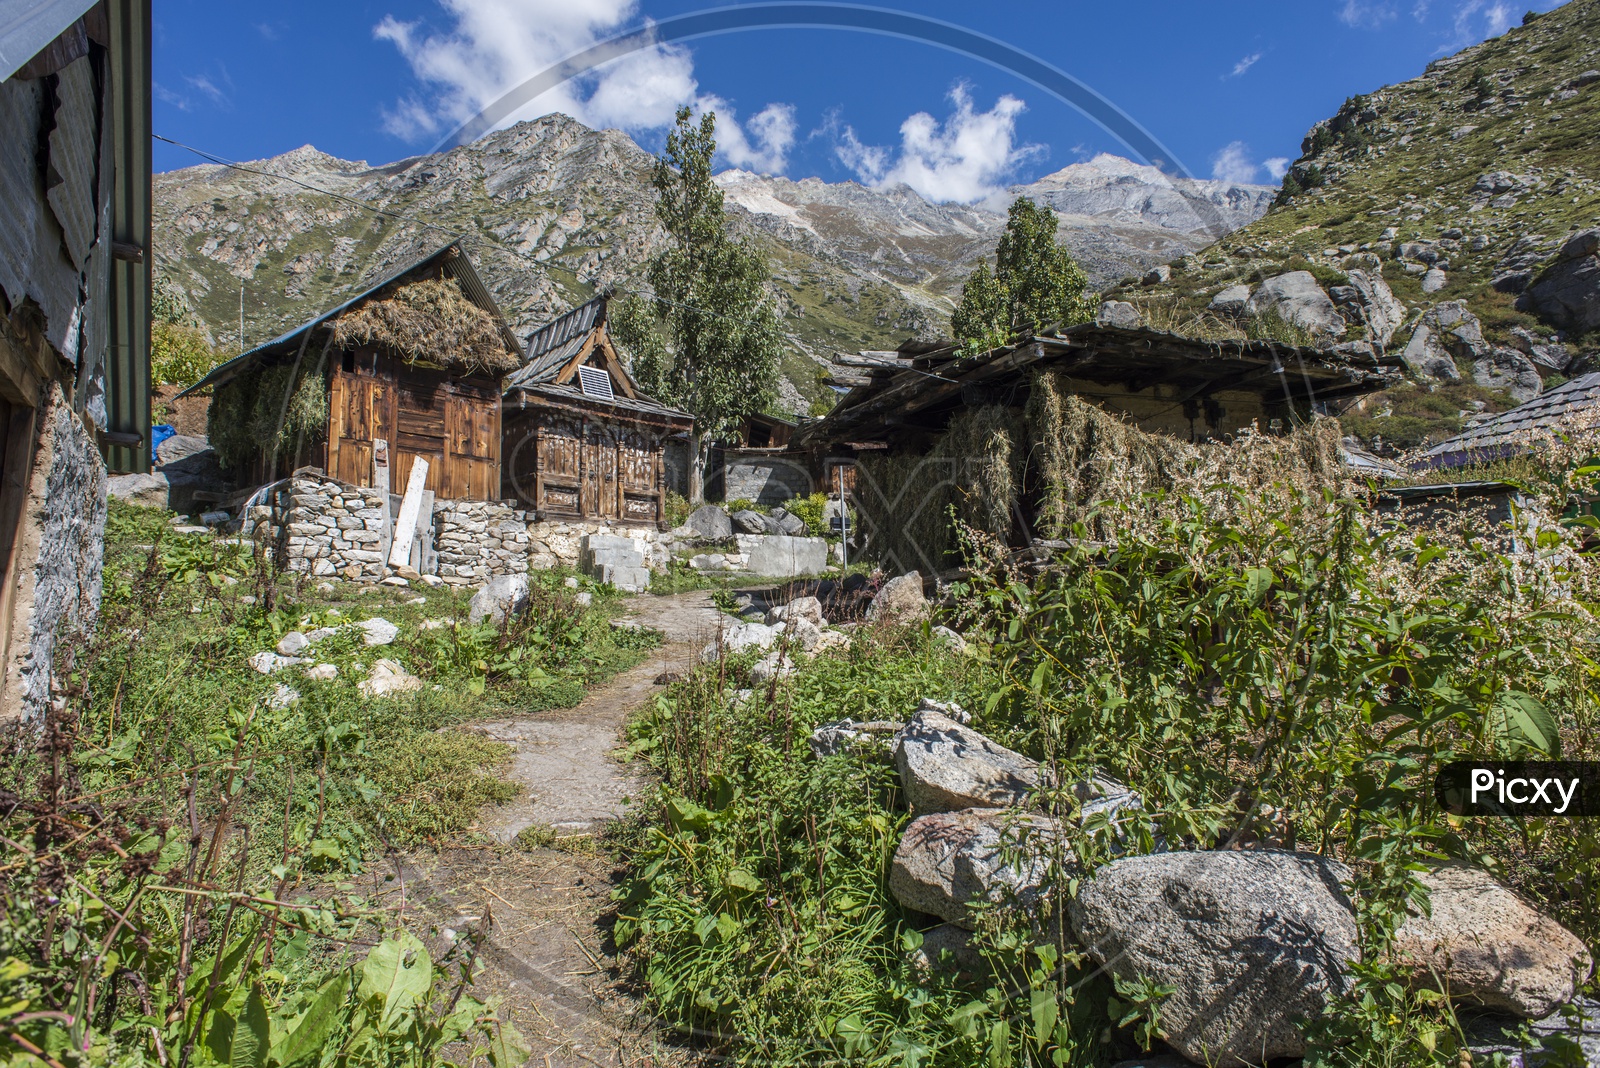 Wooden Houses at Chitkul Village